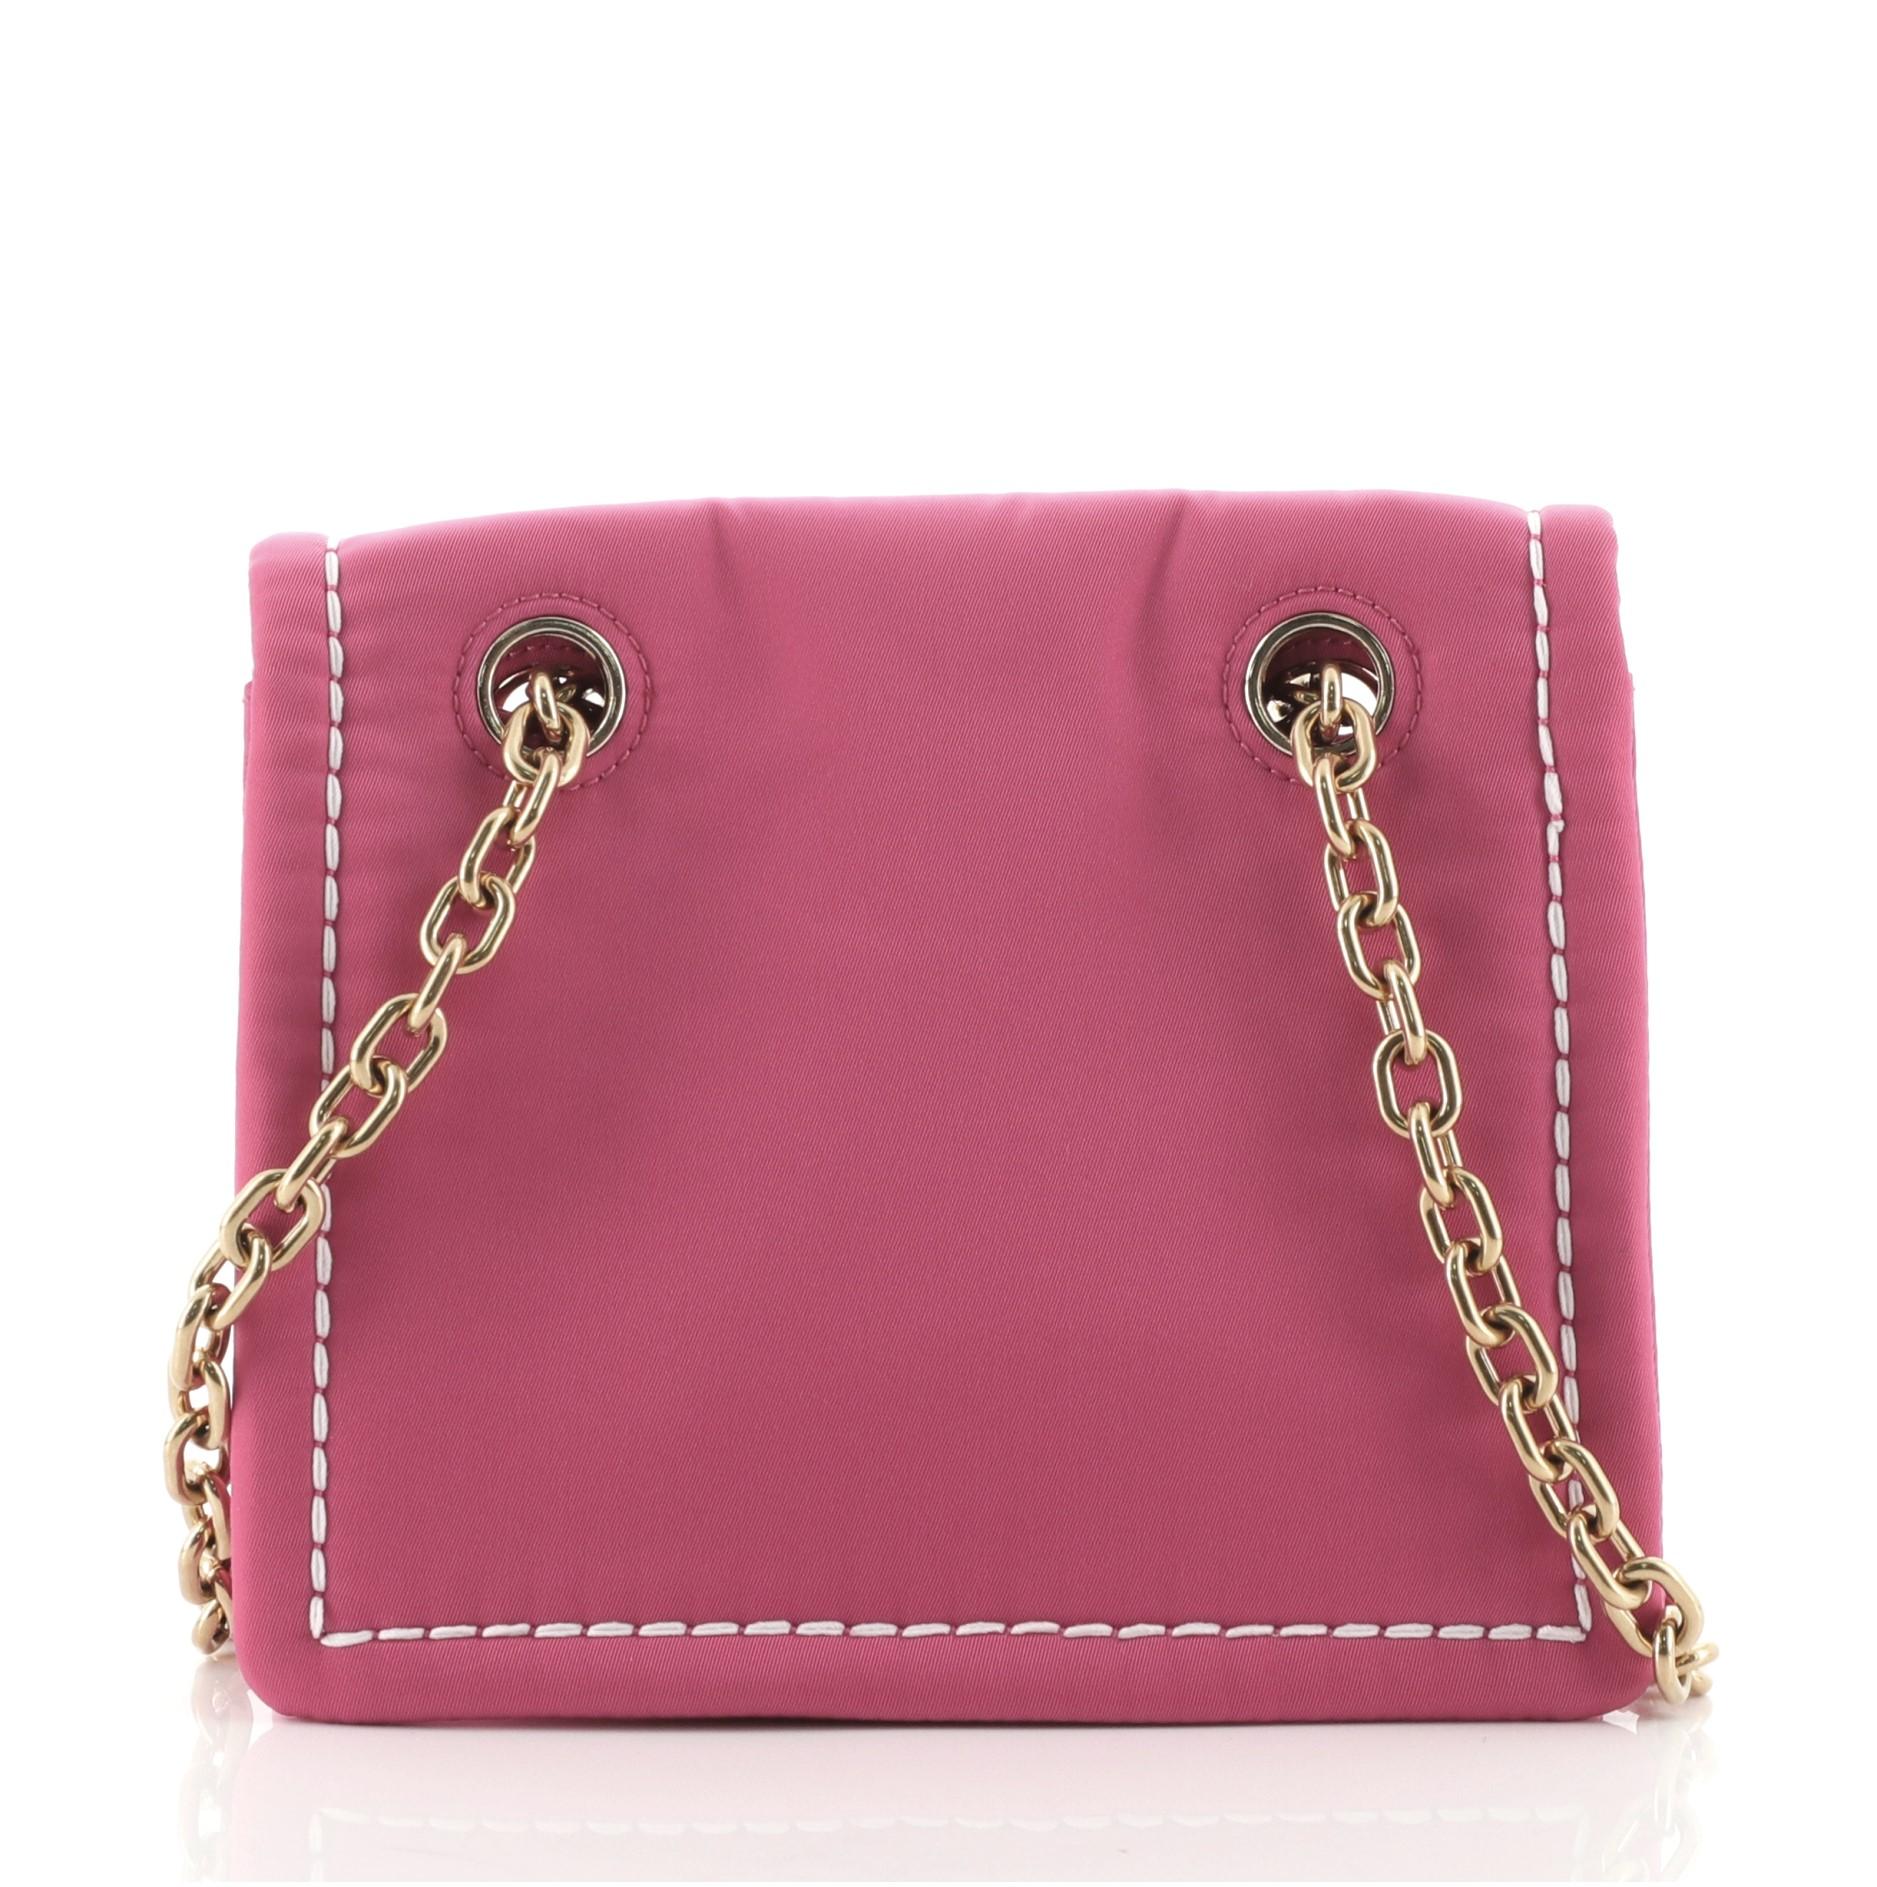 Prada Padded Chain Flap Bag Tessuto Small
Pink

Condition Details: Minor wear on flap edge and in interior base, scratches on hardware.

52141MSC

Height 6.5